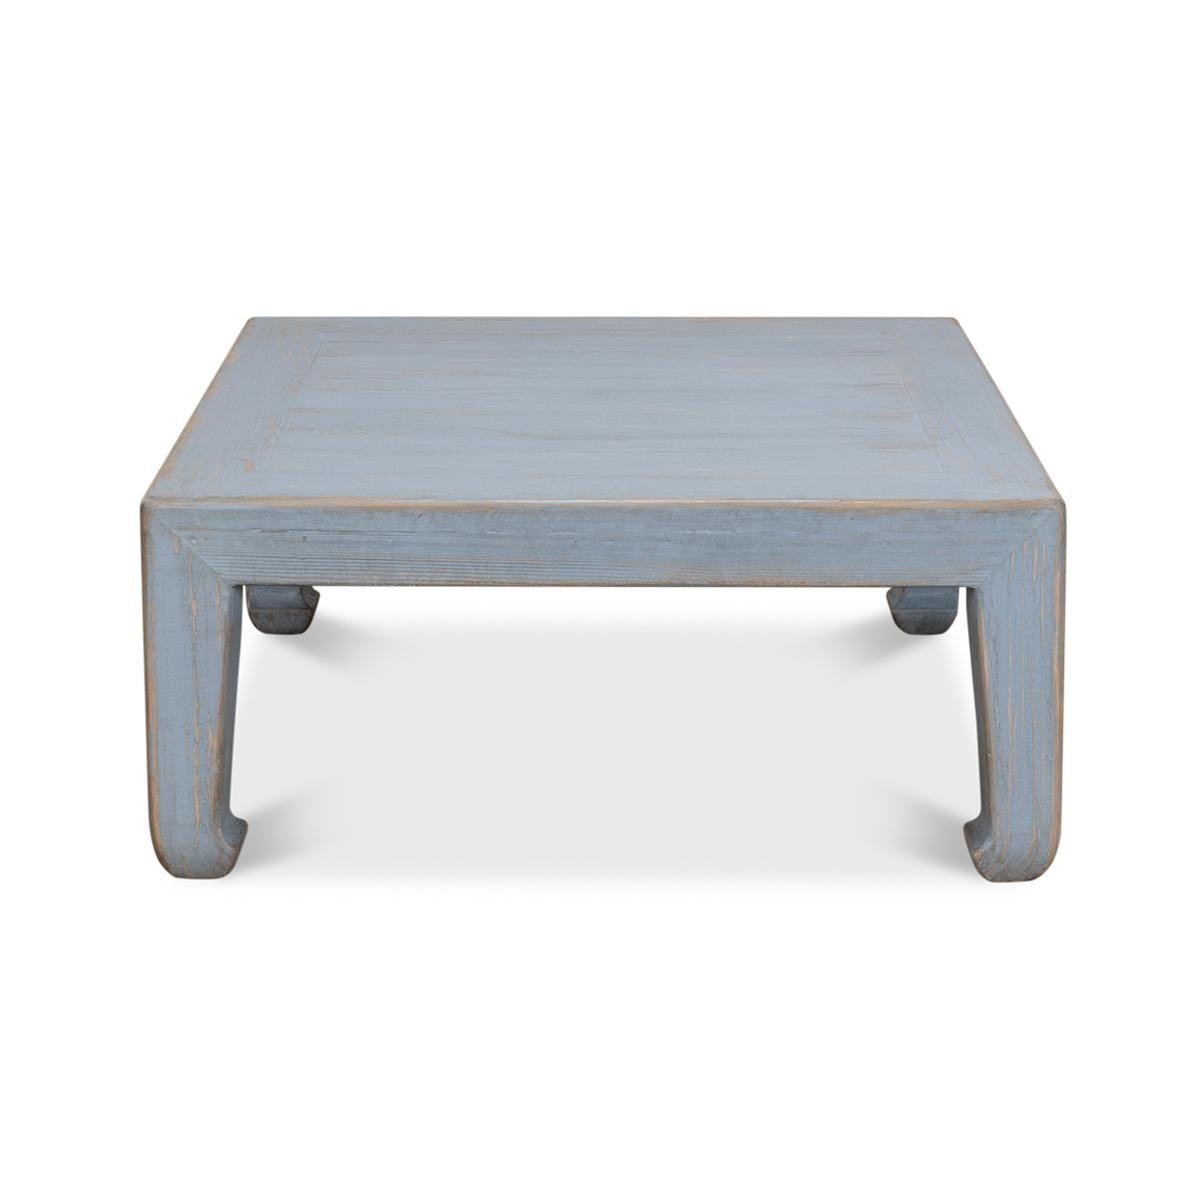 Asian Style Vintage Blue Coffee Table, a classic style inspired by the far east. This table is a square shape with horse hoof-style legs, a design that dates back to the 14th century.
Crafted of reclaimed pine in dark light vintage blue.
Dimensions: